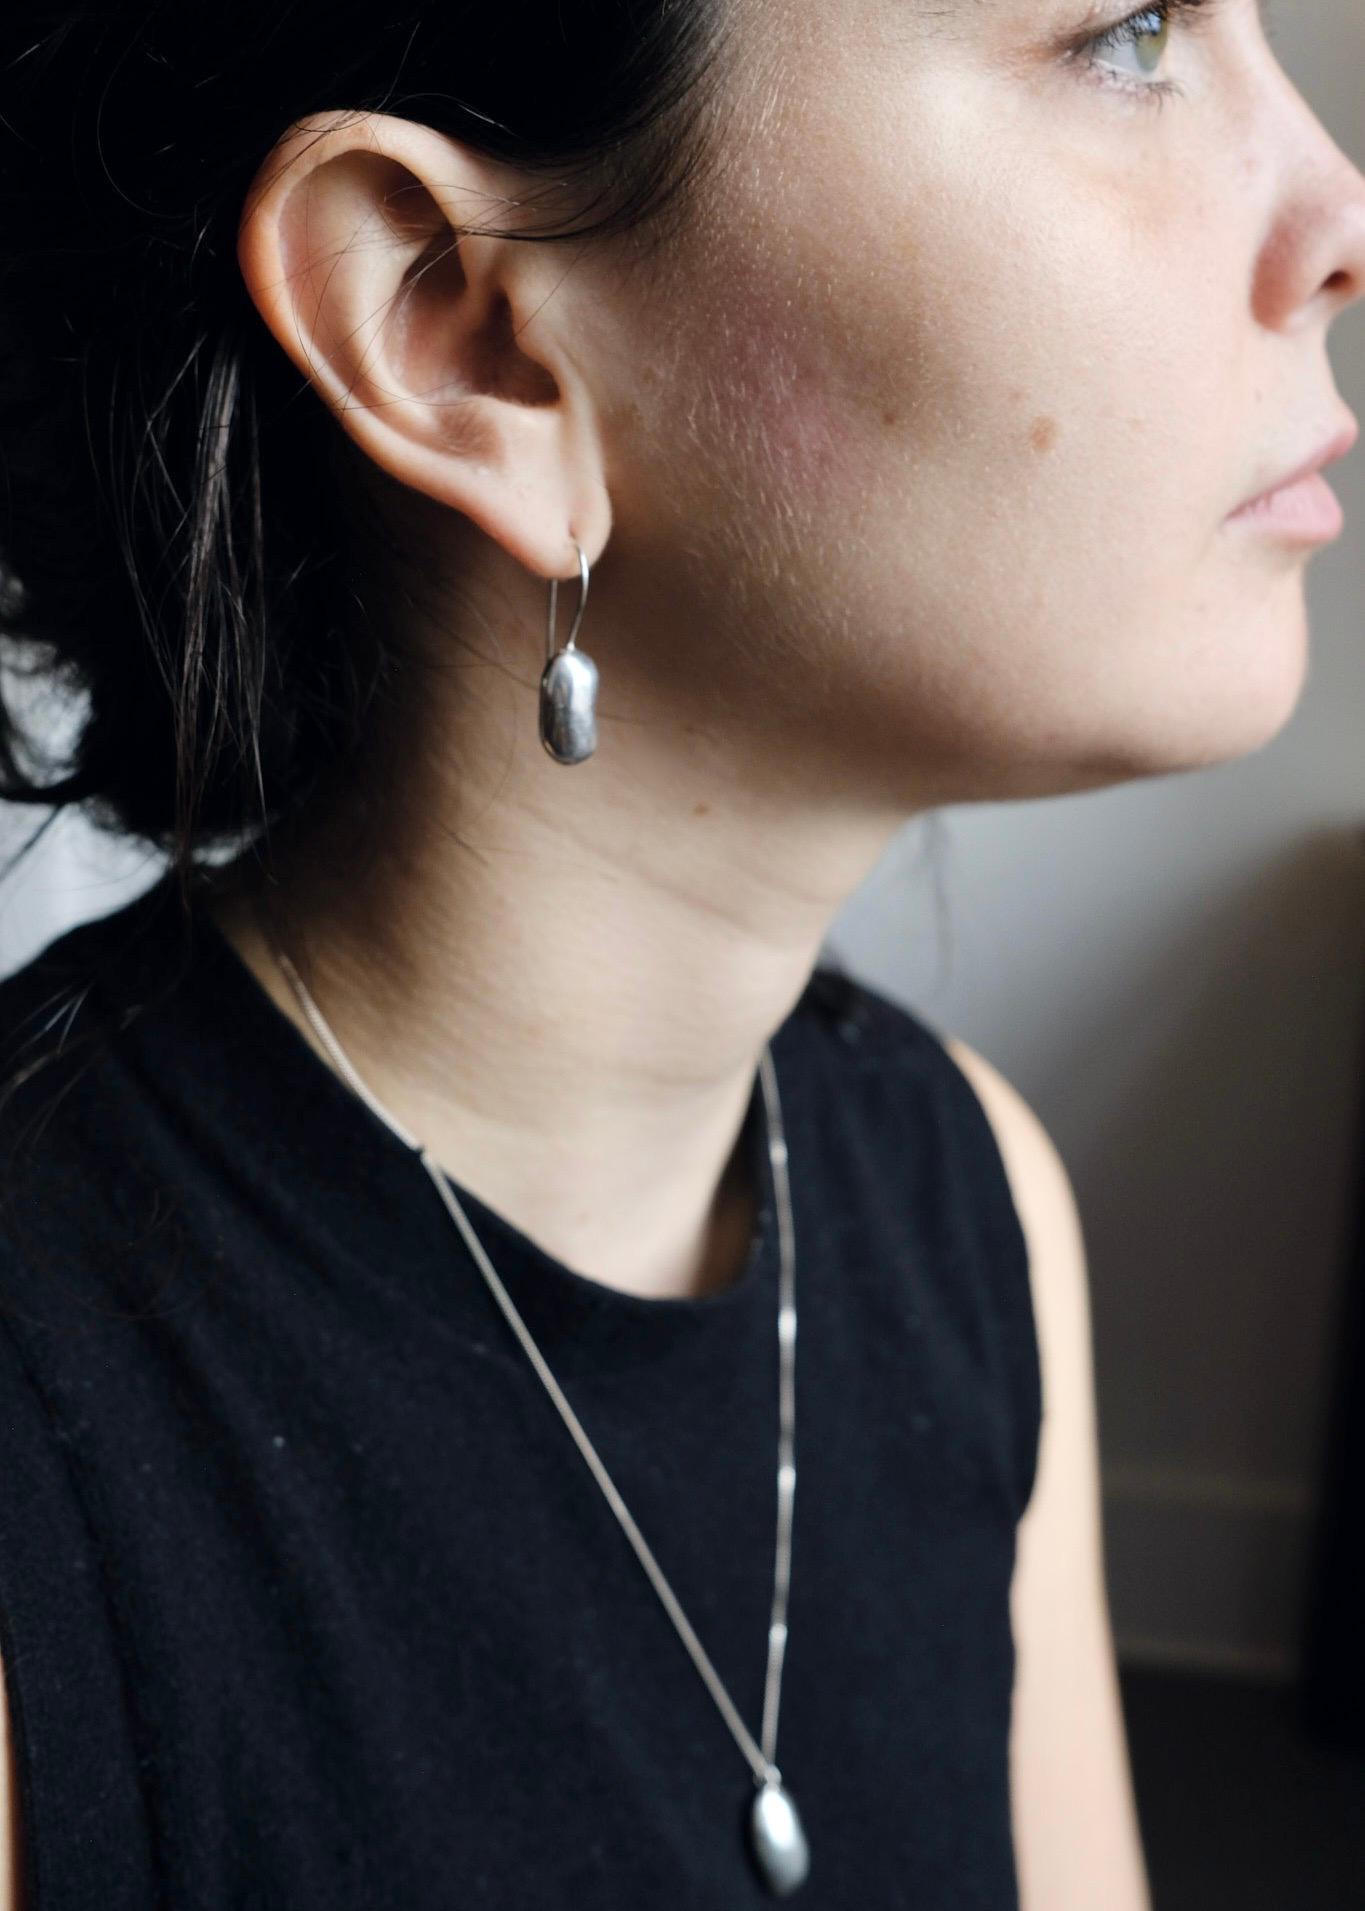 These earrings are elegantly shaped with a playful twist. They are perfect chunky everyday drop earrings.

They are cast from real kidney beans in recycled sterling silver, and are finished with a matte sheen to catch the light when worn. No two are